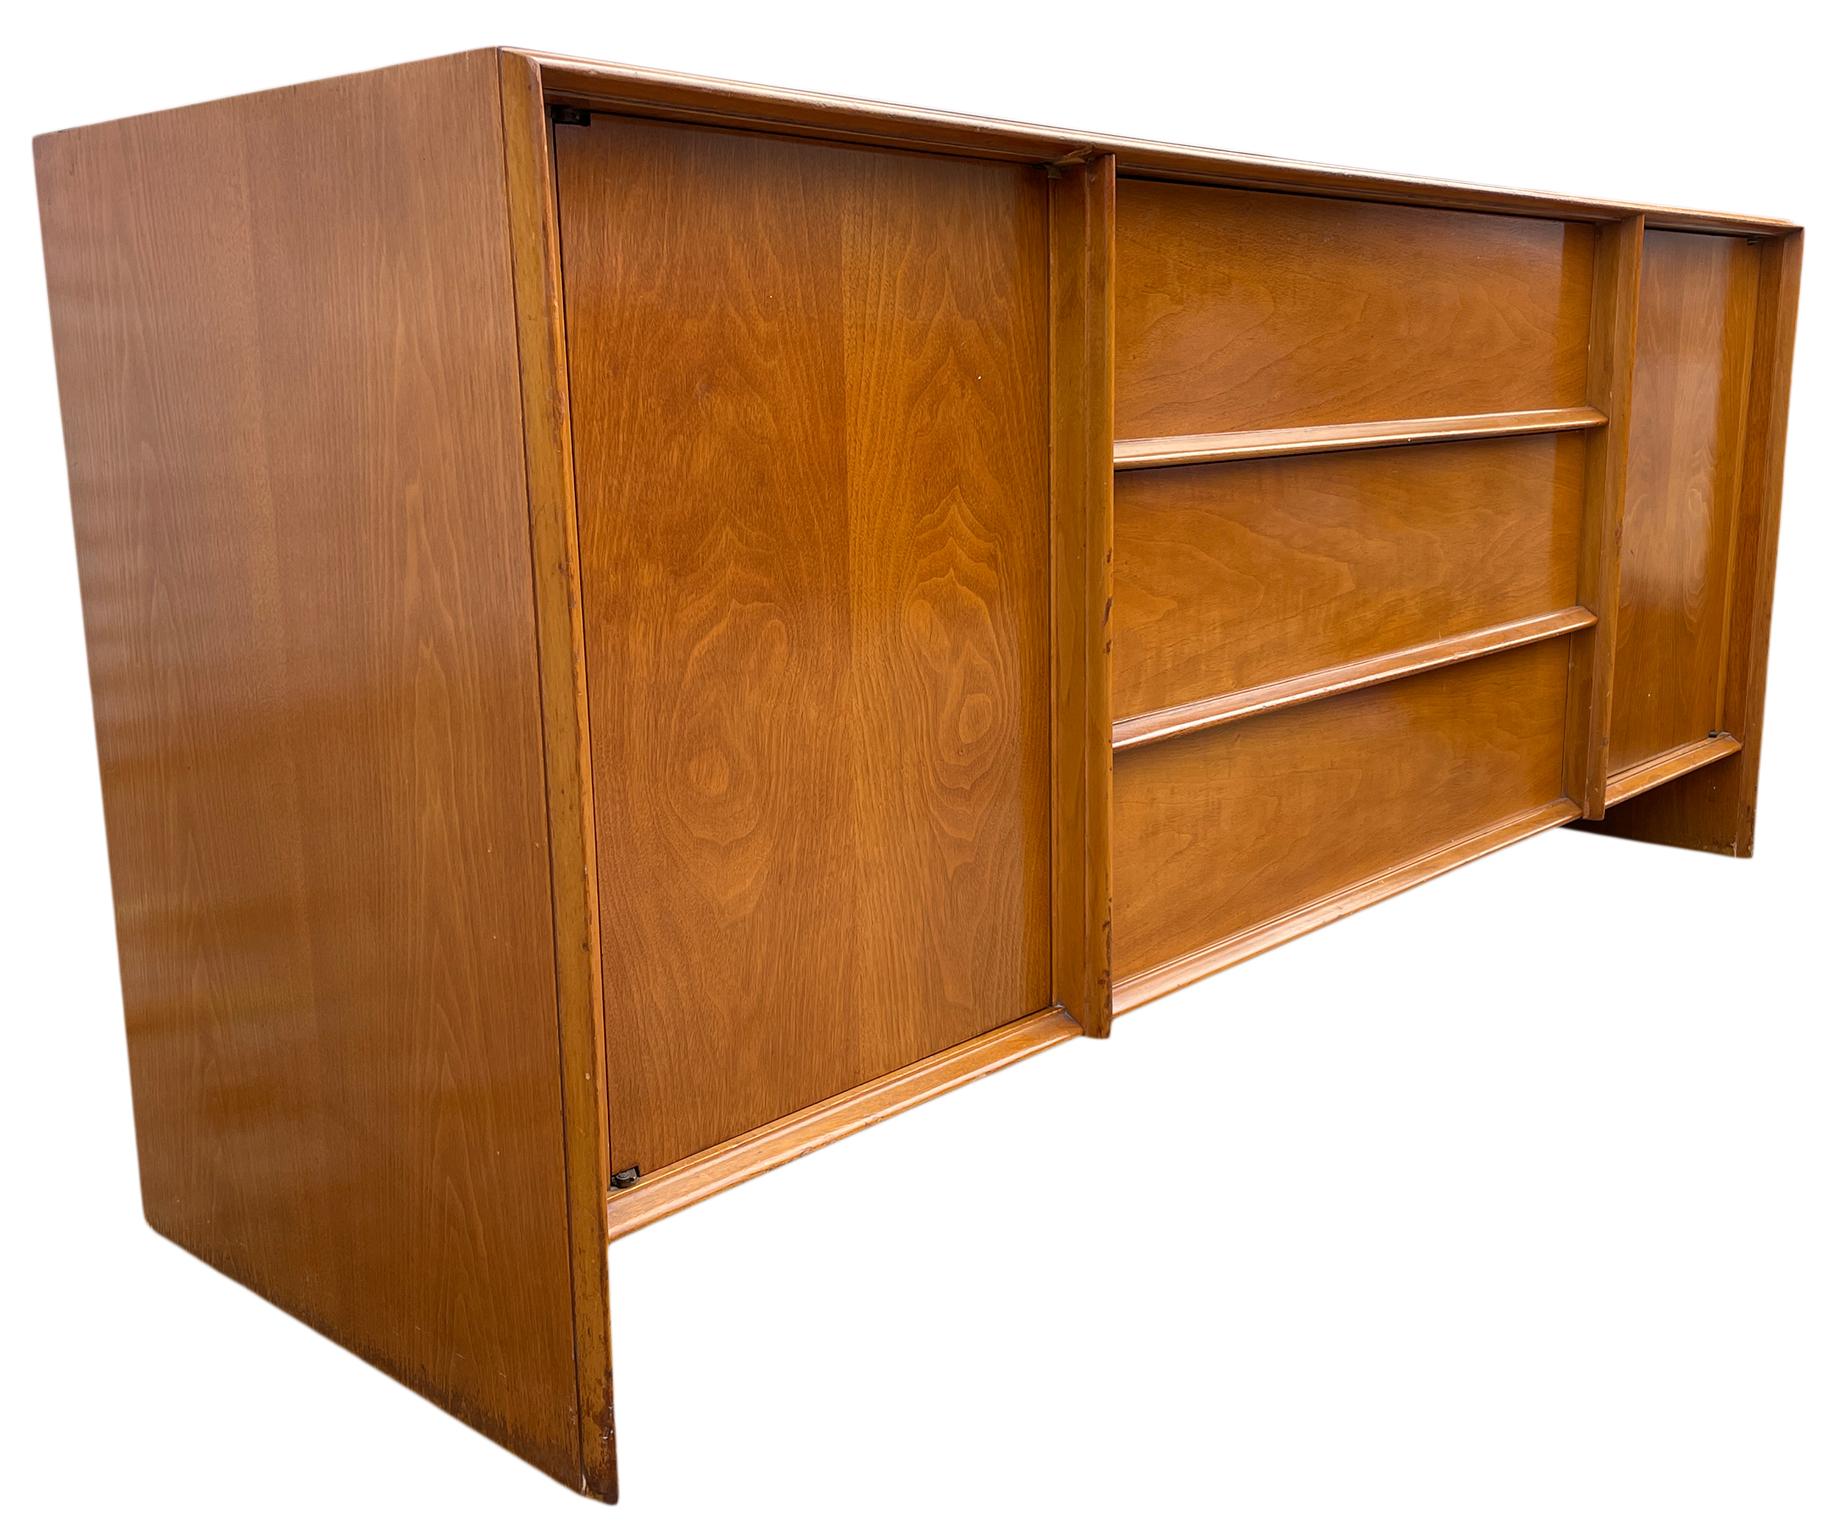 Mid-Century Modern Beautiful 3 drawer Credenza sideboard by T.H. Robsjohn-Gibbings for Widdicomb